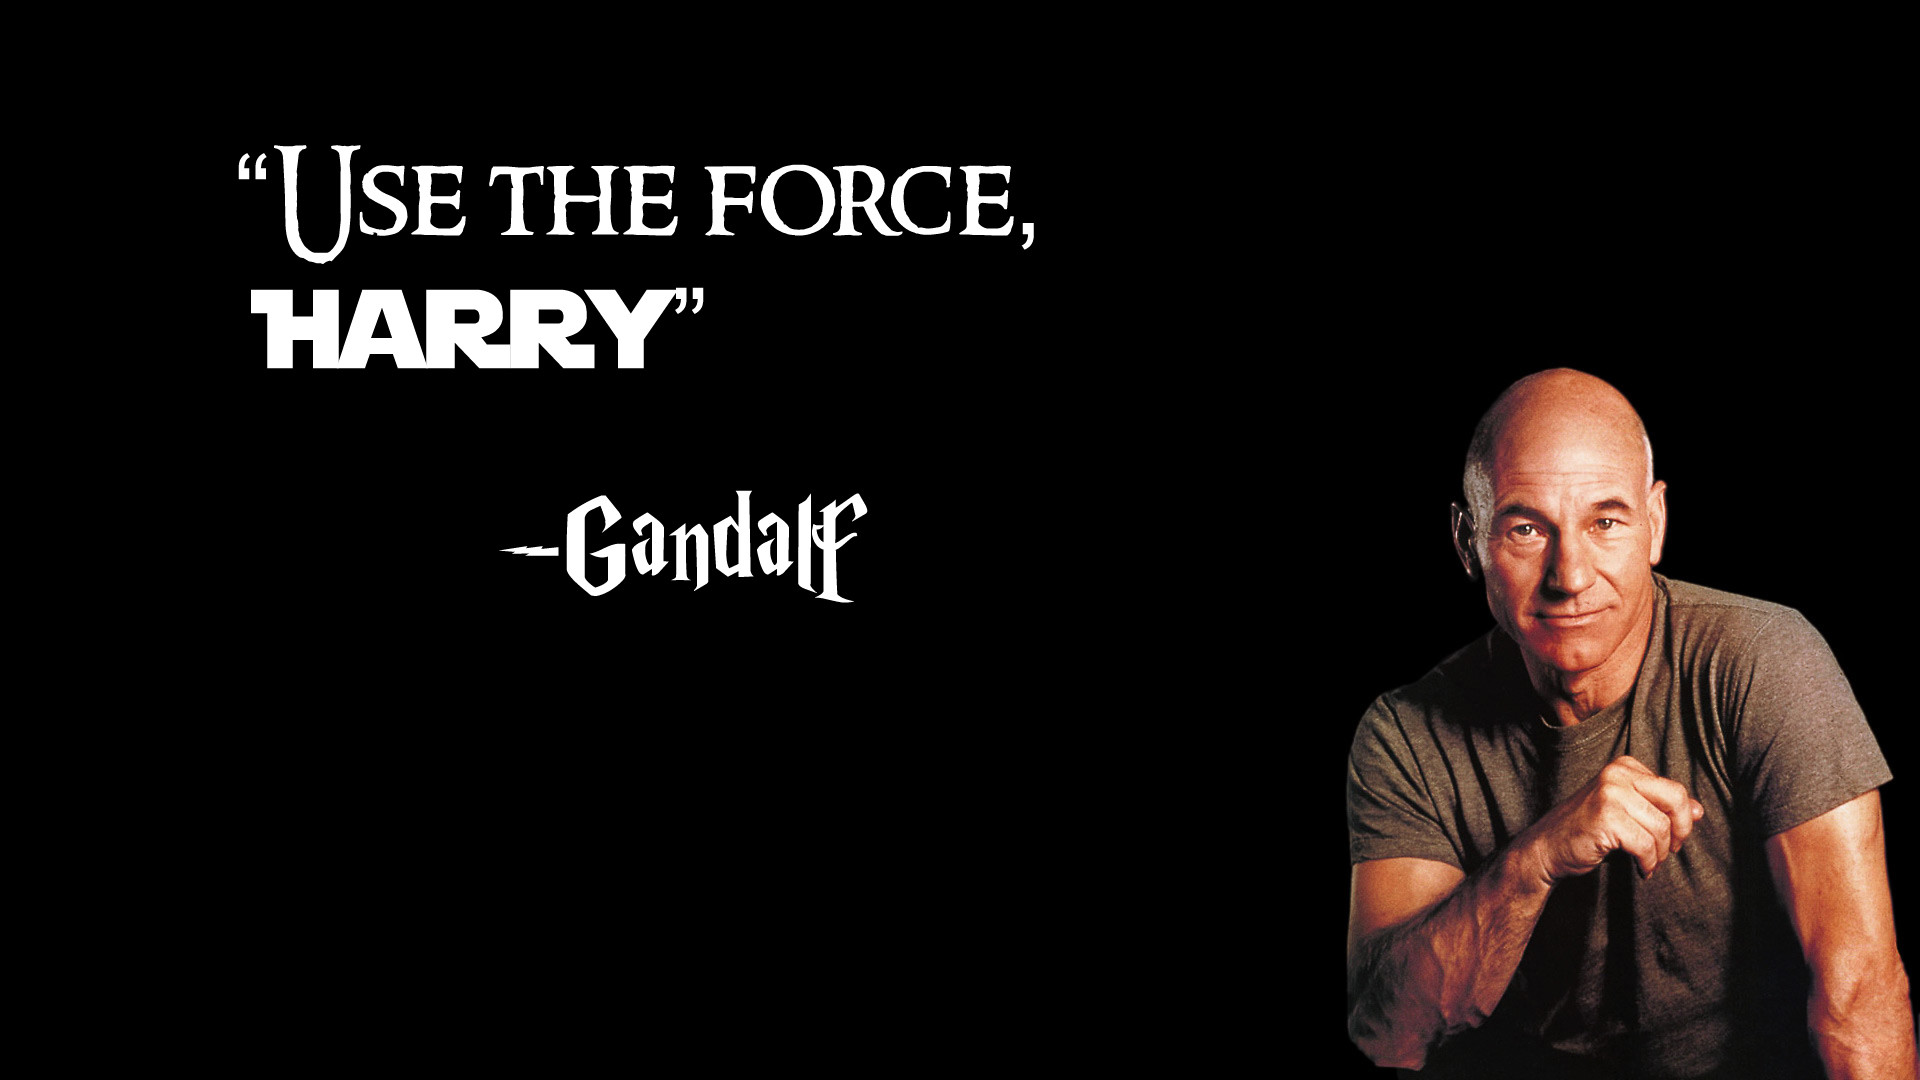 1920x1080 "Use the force, Harry" - Gandalf (in 1080p) ...